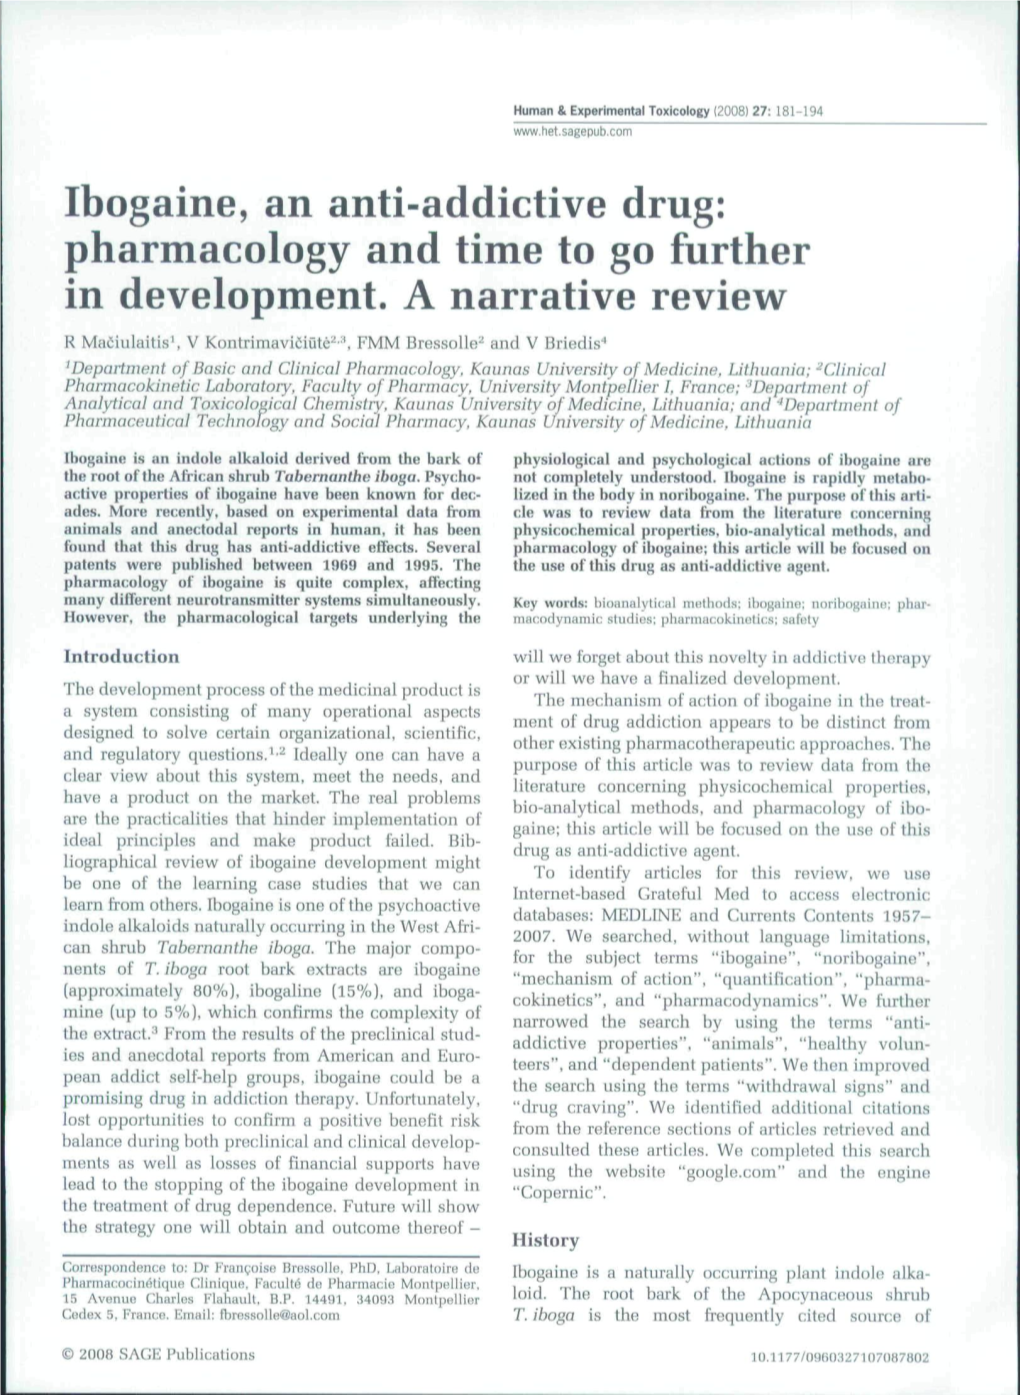 Ibogaine, an Anti-Addictive Drug: Pharmacology and Time to Go Further in Development